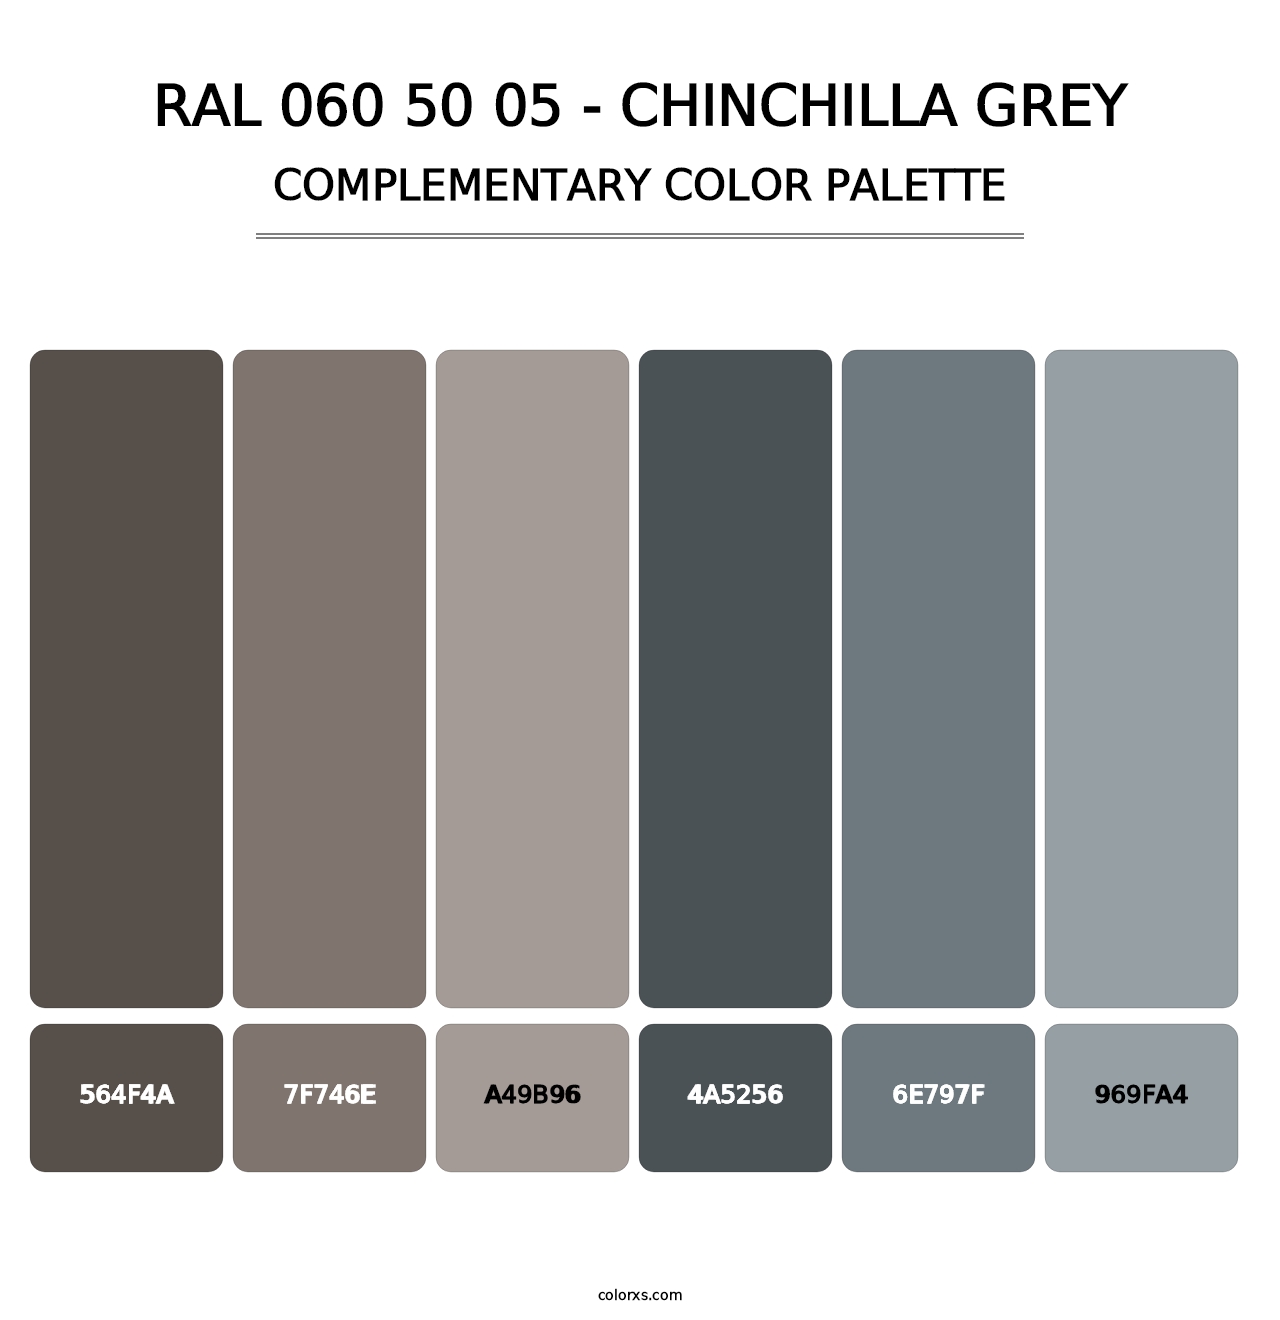 RAL 060 50 05 - Chinchilla Grey - Complementary Color Palette